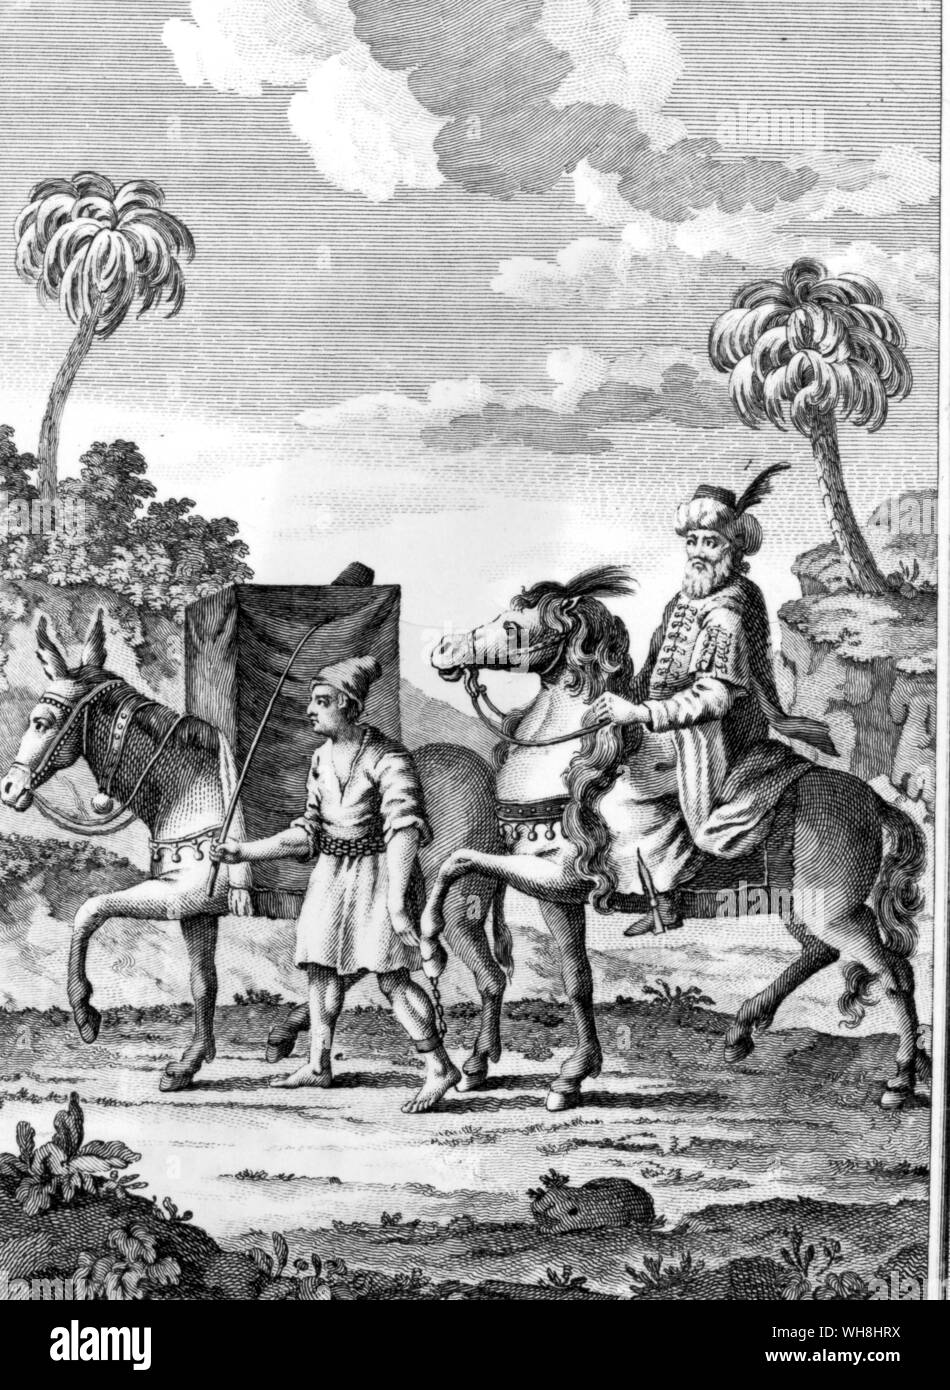 Well-to-do horseman in Barbary with his wife riding concealed in a travelling tent. The African Adventure - A History of Africa's Explorers by Timothy Severin, page 80. Stock Photo